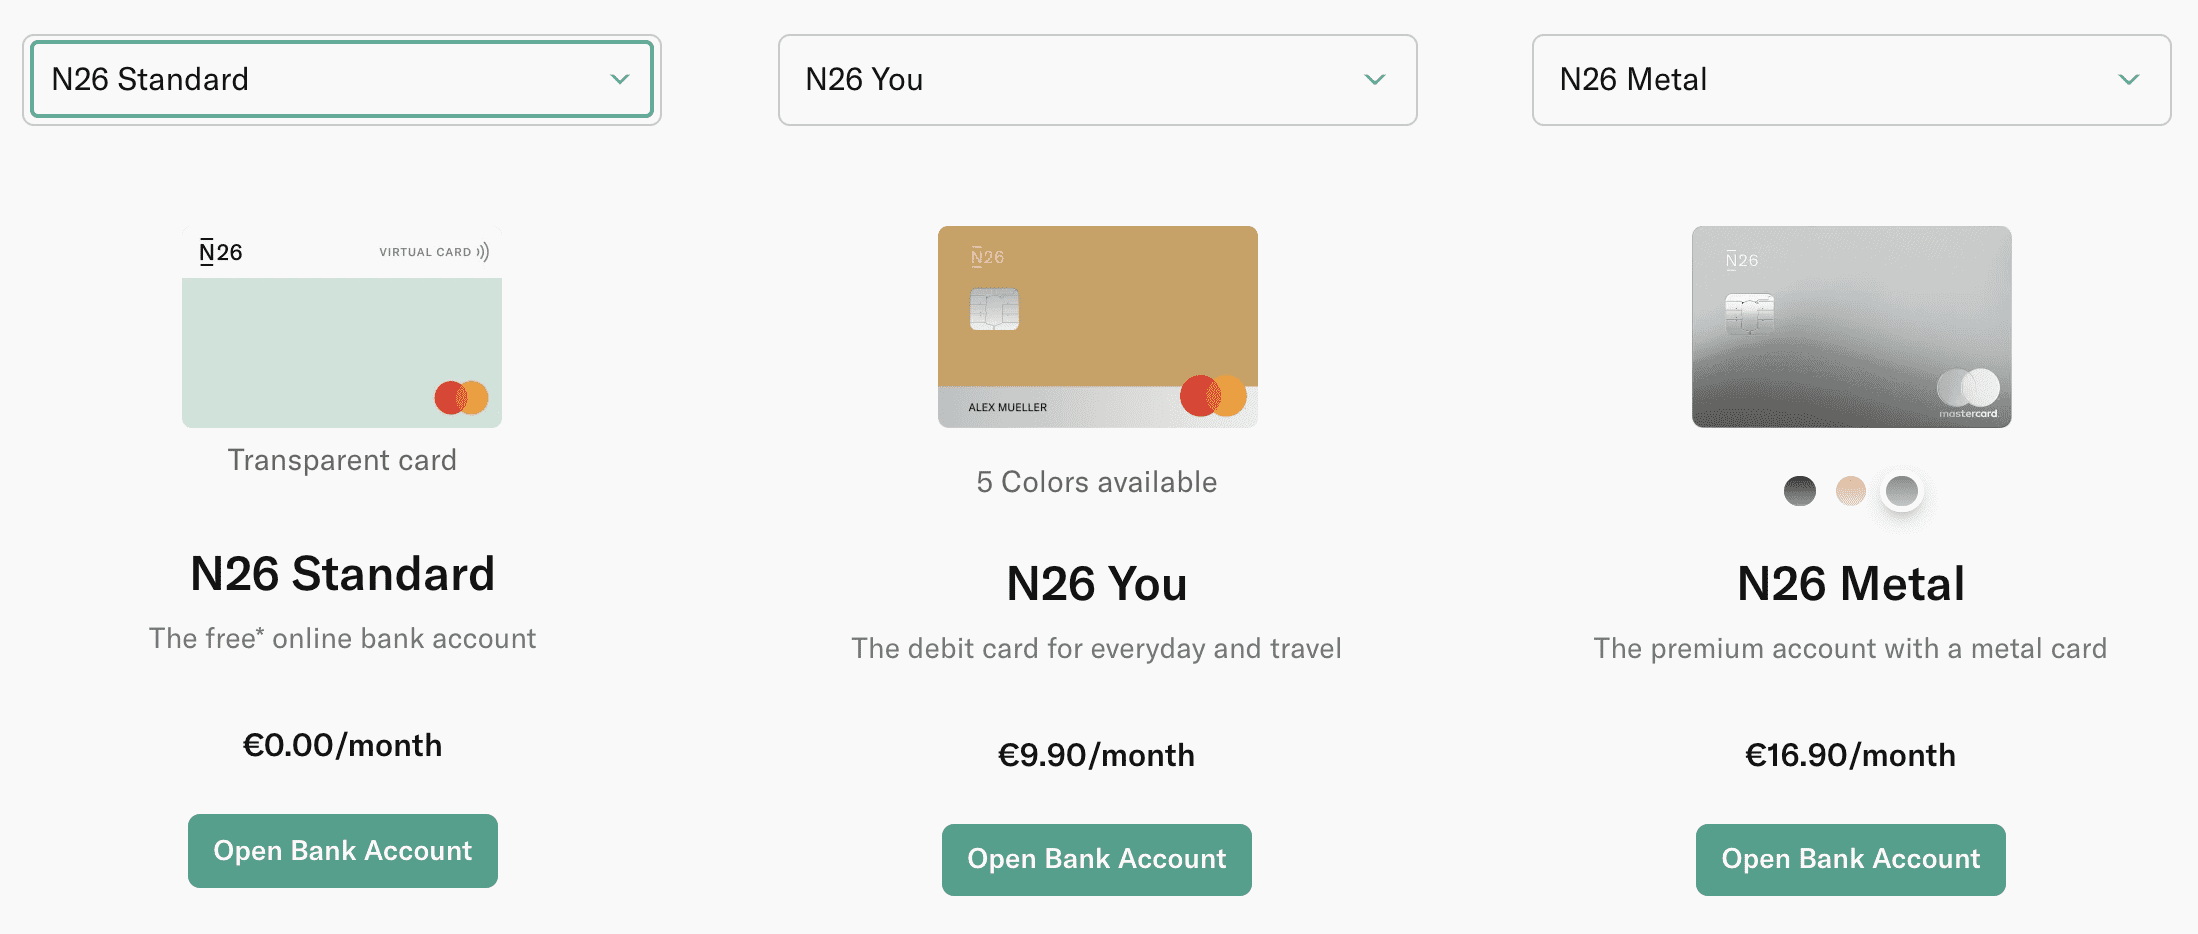 N26 customer support chat